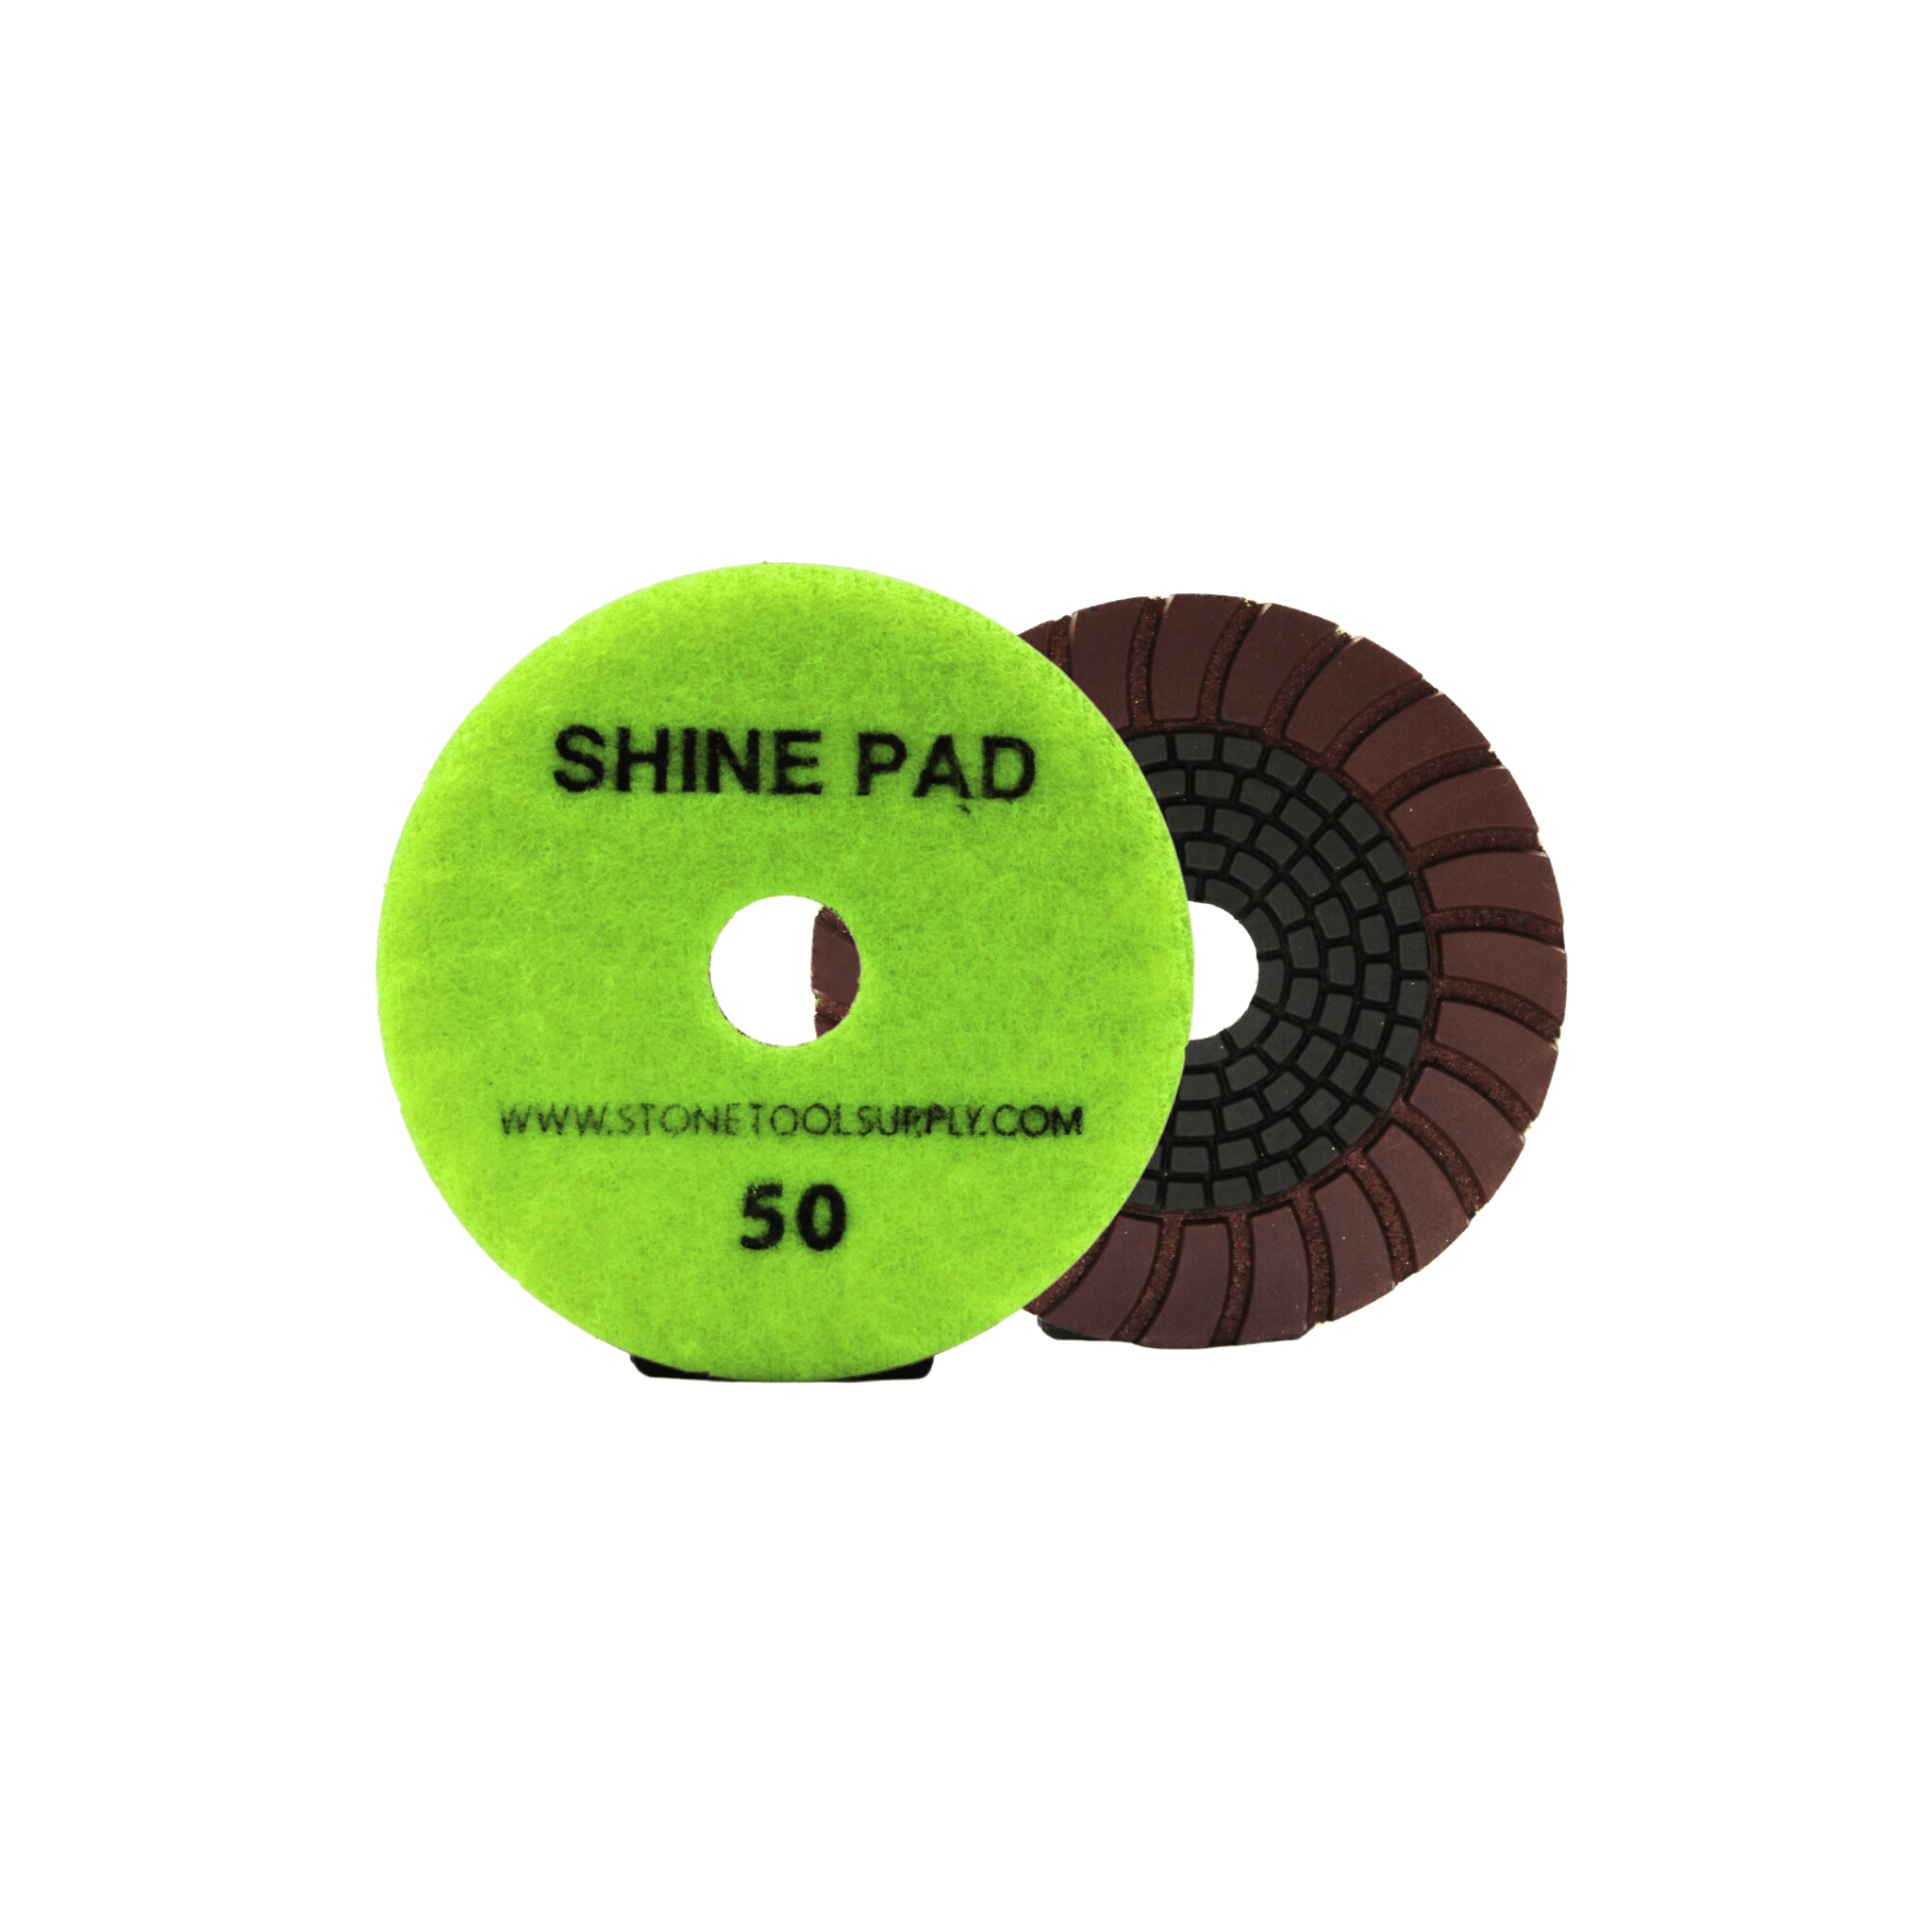 Copper and Resin Bonded 'Shine' Pad 4" #50 - Direct Stone Tool Supply, Inc